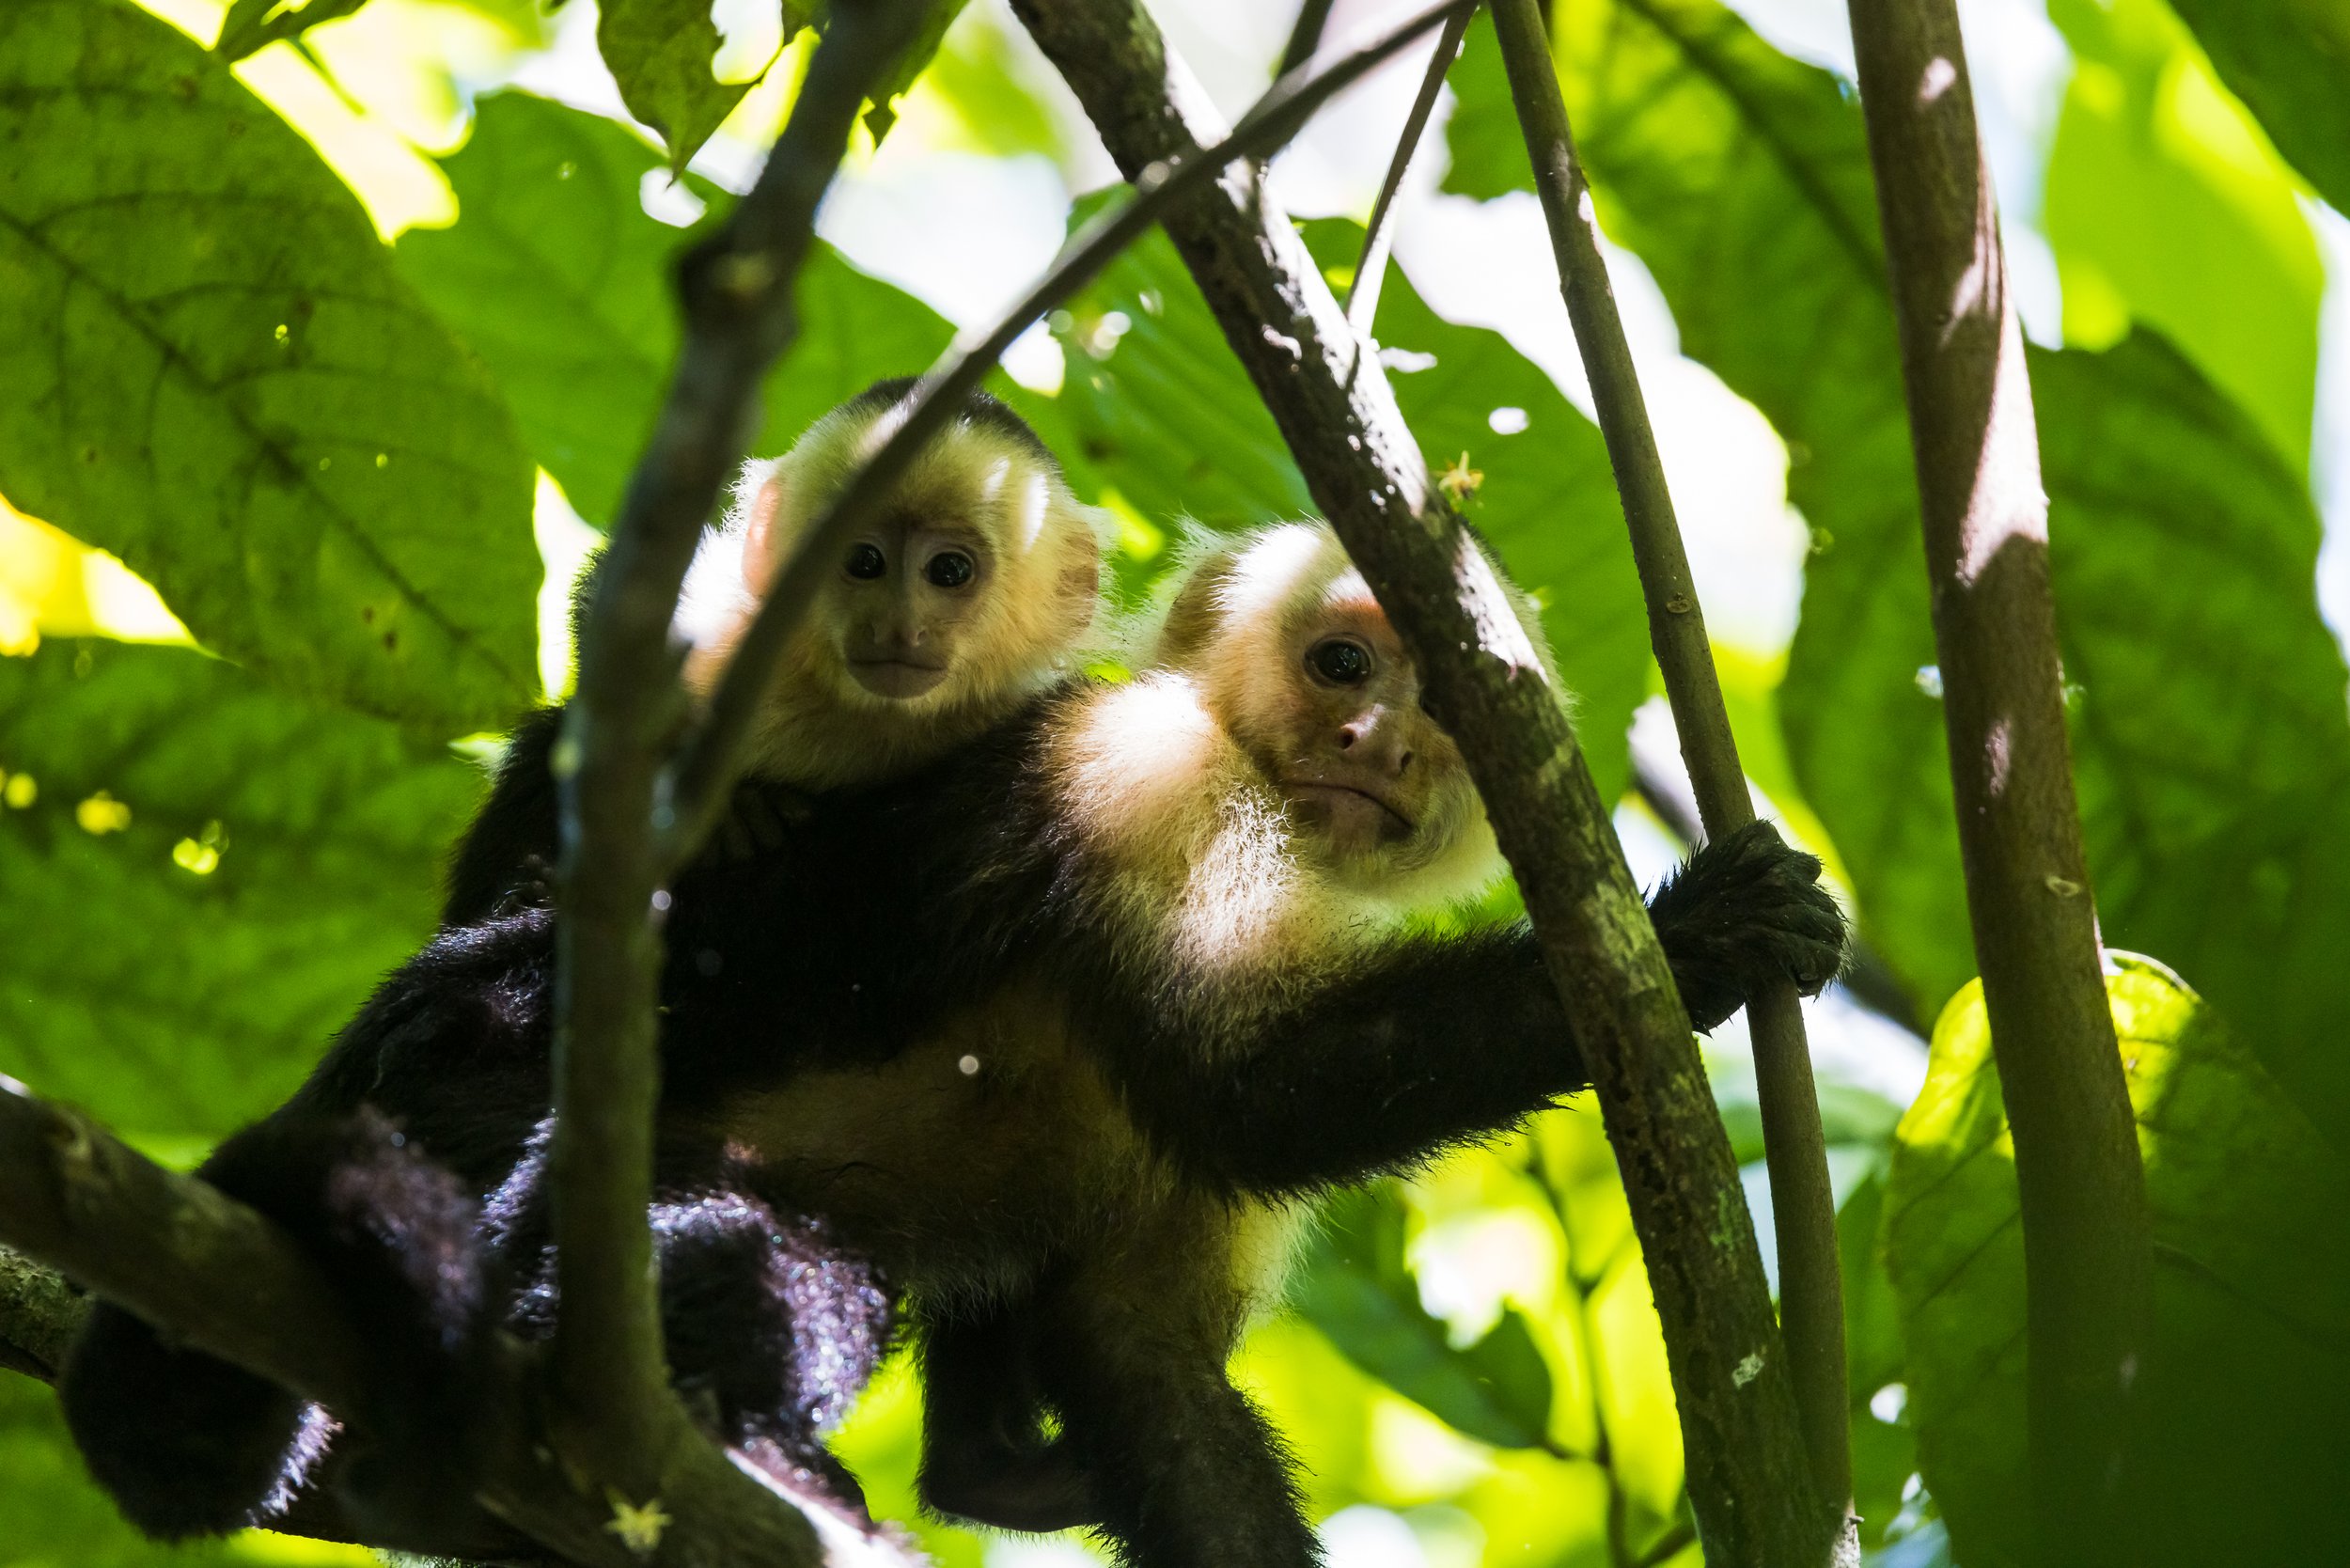 White Faced Monkey, Mother and Child.  Also known as Capuchin Monkey